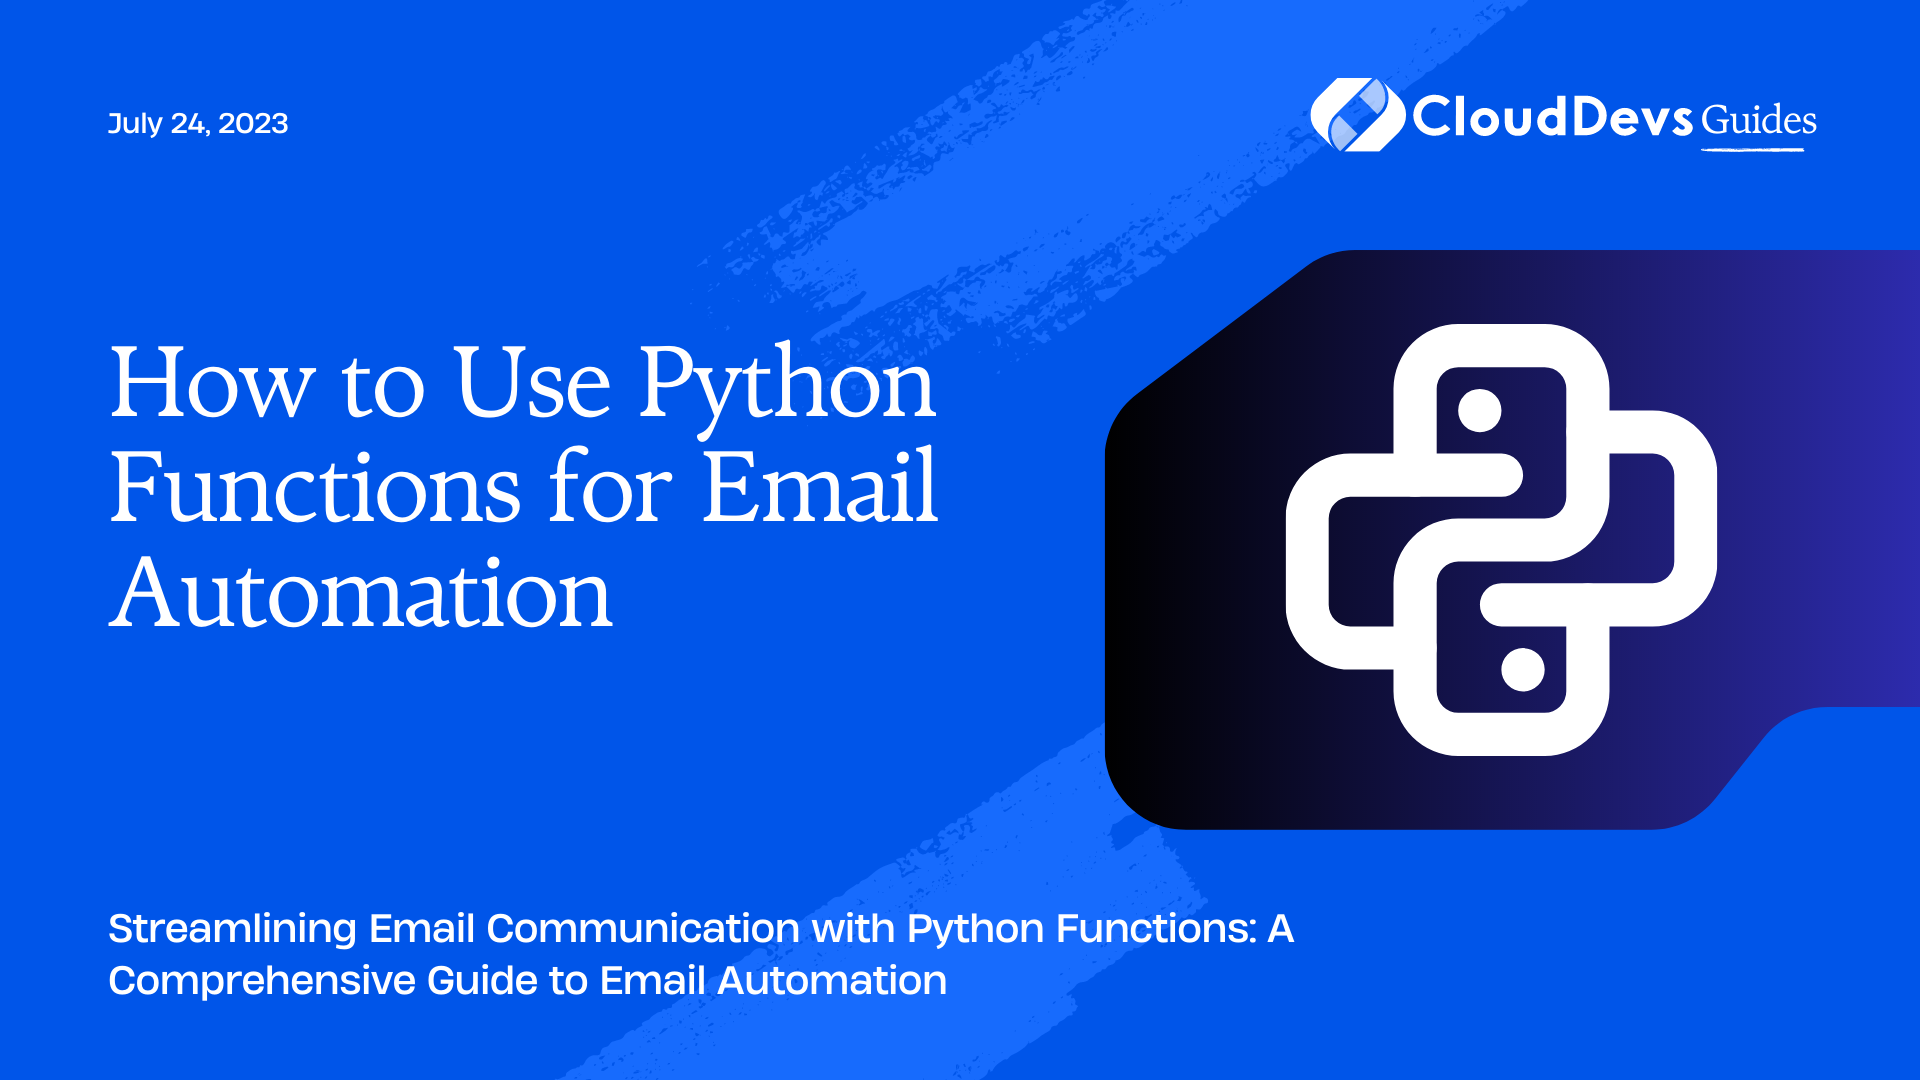 How to Use Python Functions for Email Automation